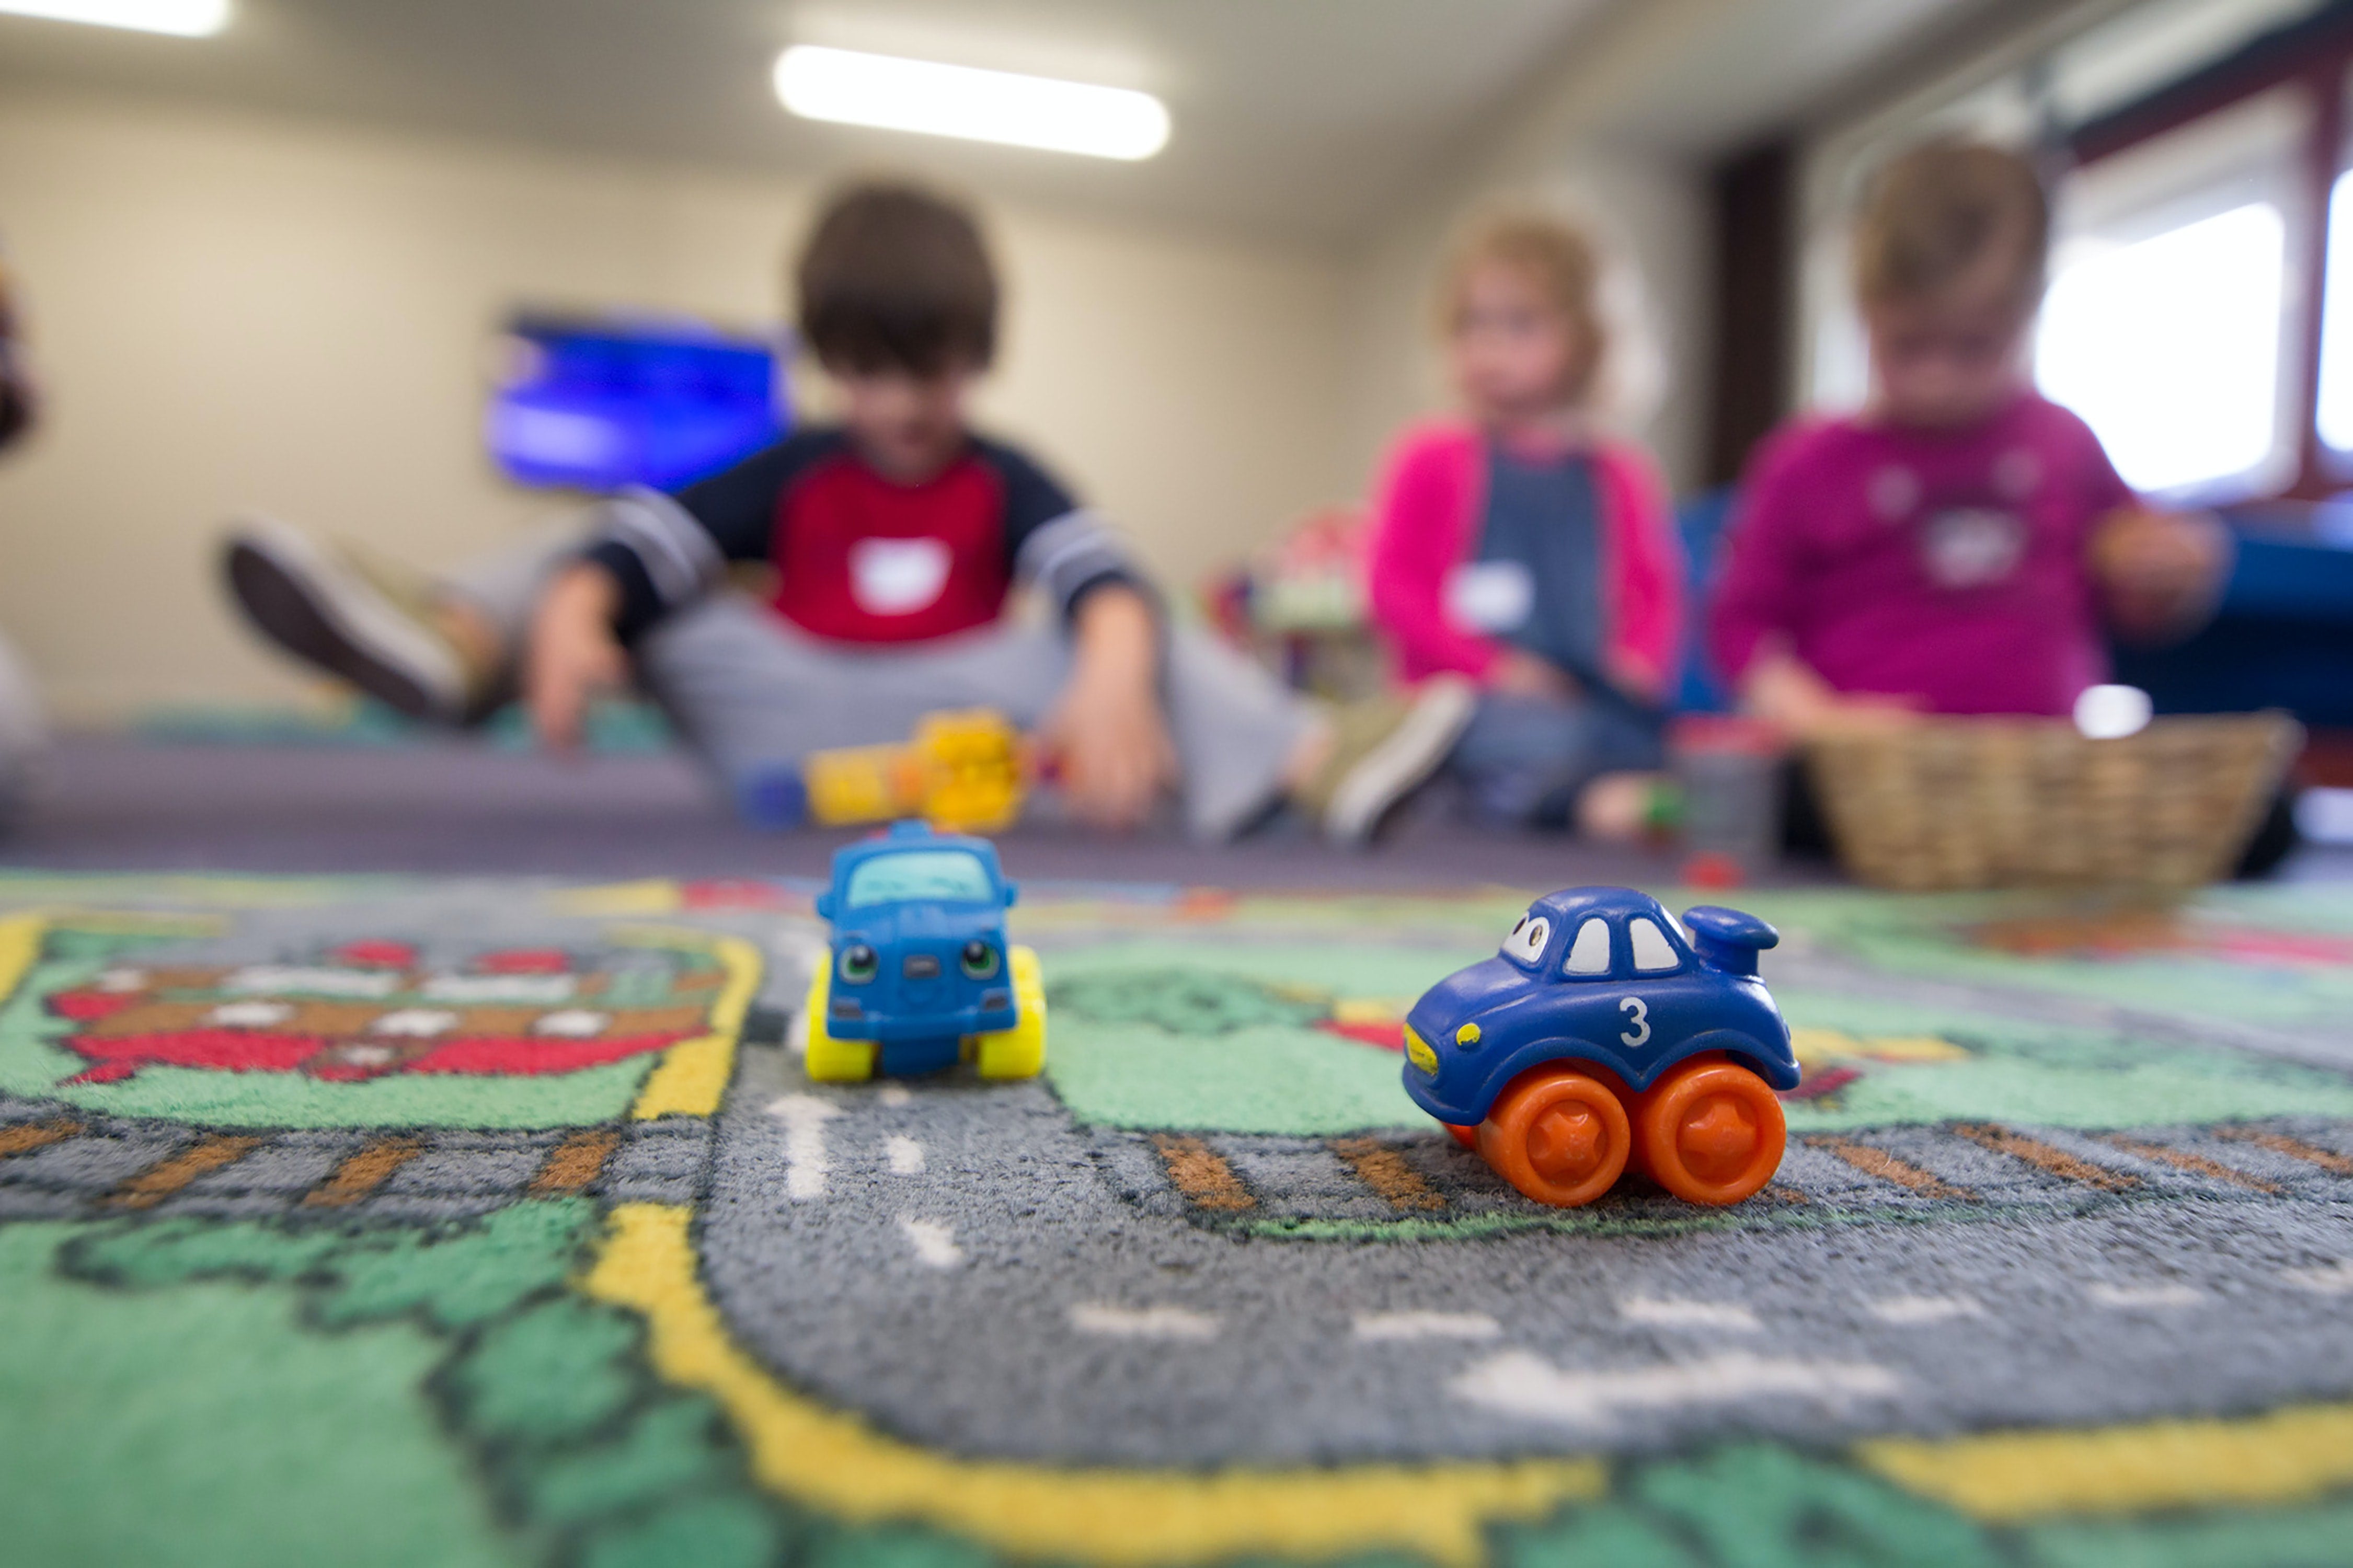 4 Actionable Ways For Daycares To Increase Profitability - Simplified Playgrounds